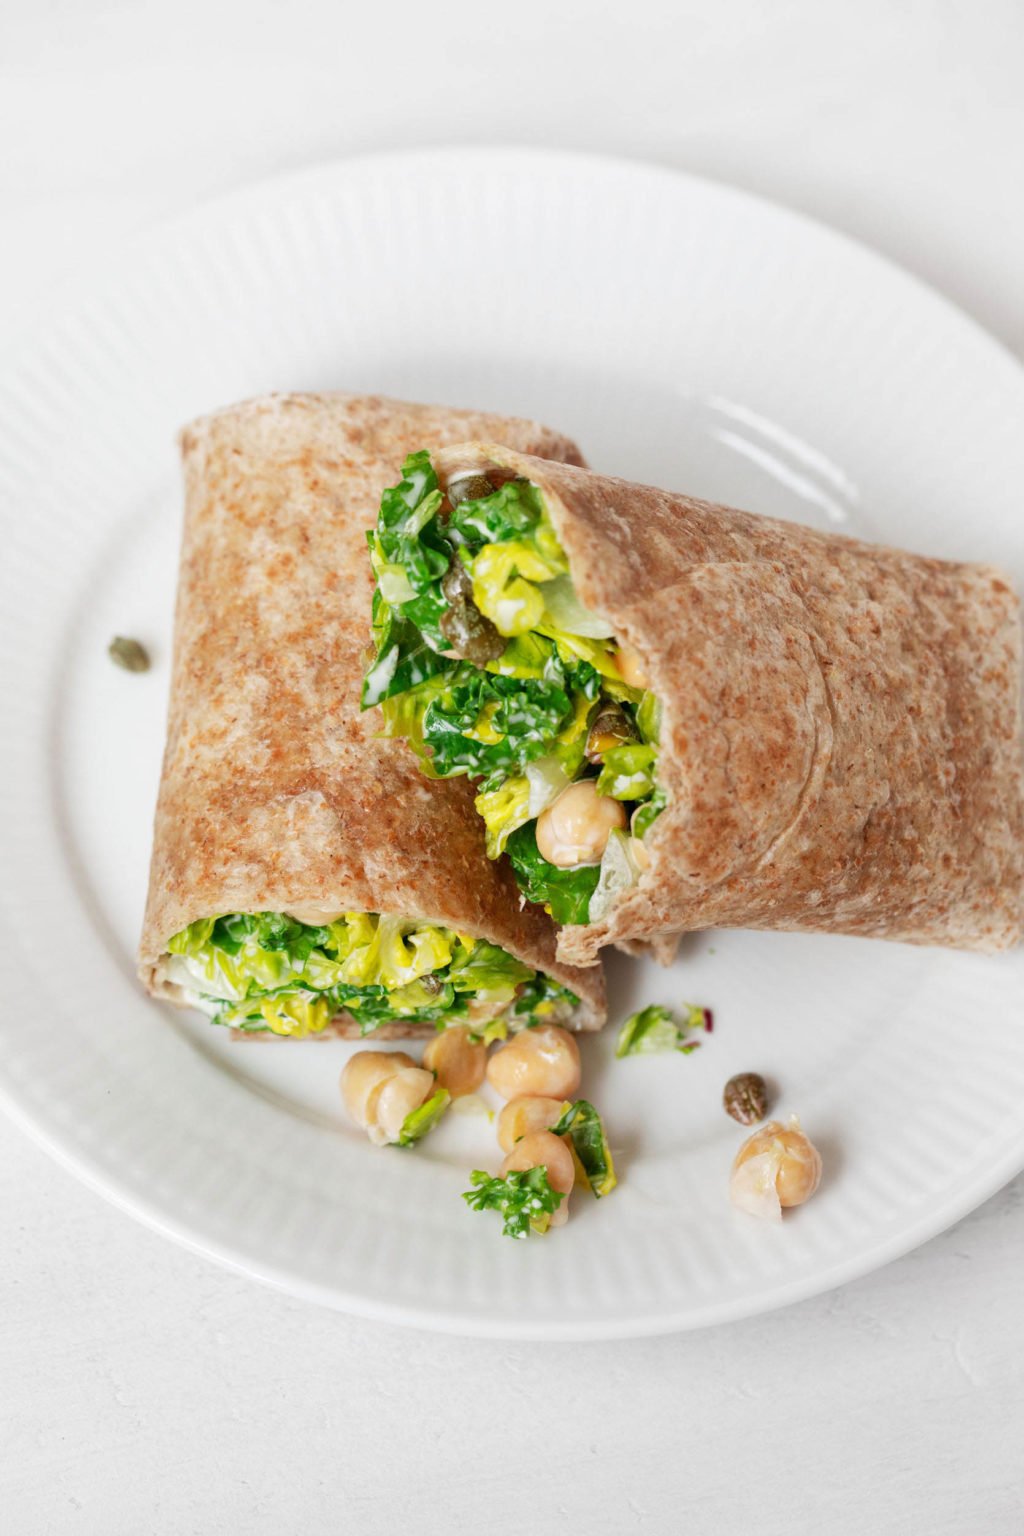 A whole grain wrap has been stuffed with a vegan chickpea Caesar salad. It rests on a white serving plate.